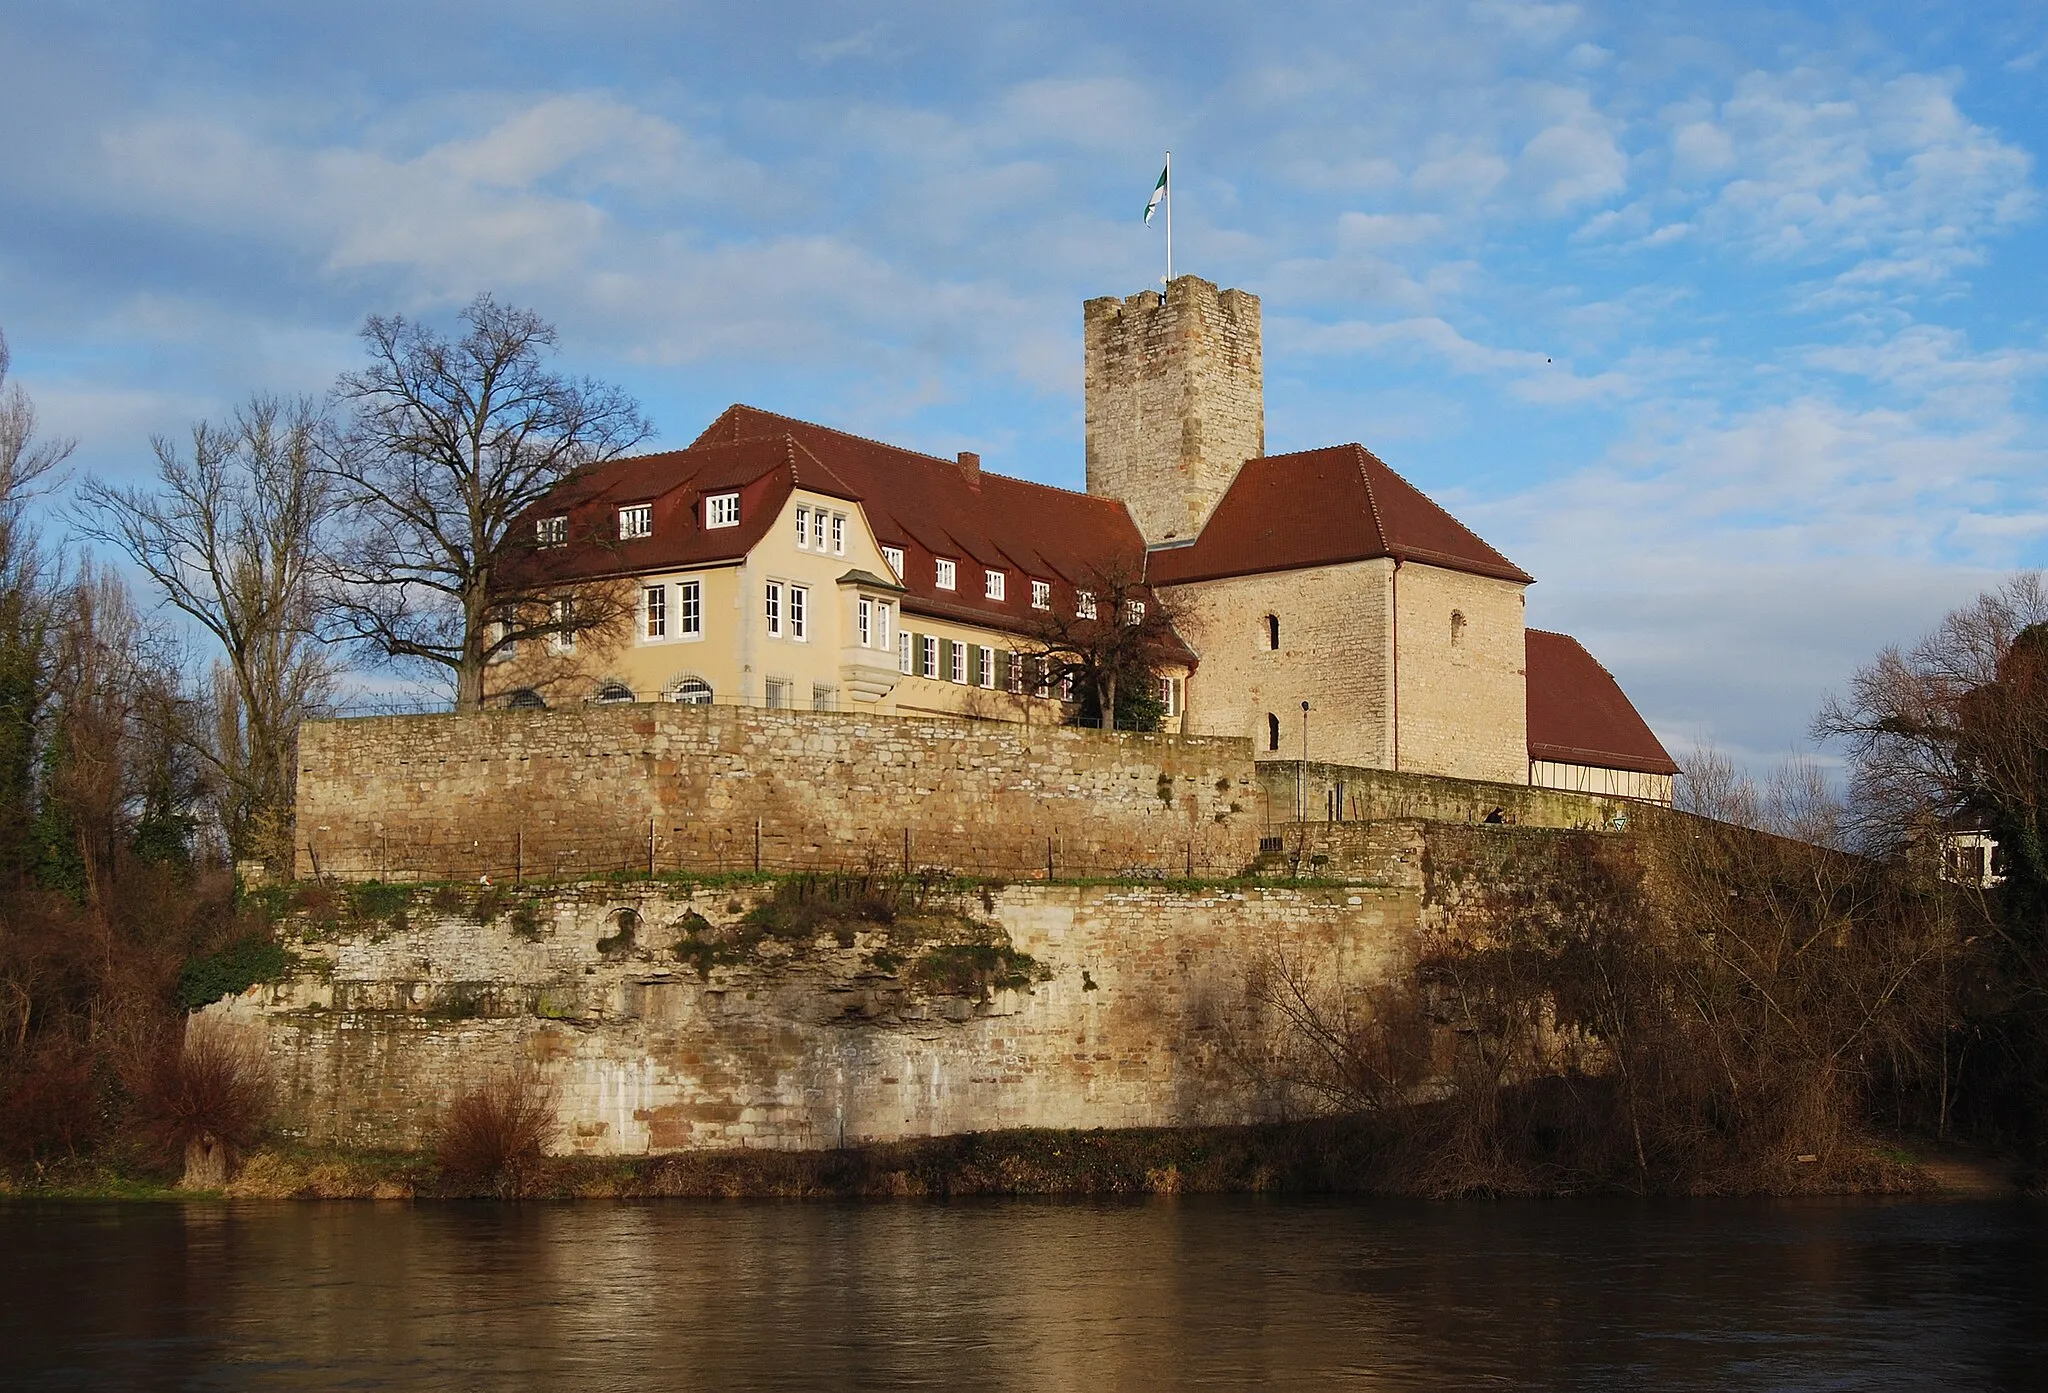 Photo showing: The Grafenburg (now used as town hall) in Lauffen am Neckar, Baden-Württemberg.